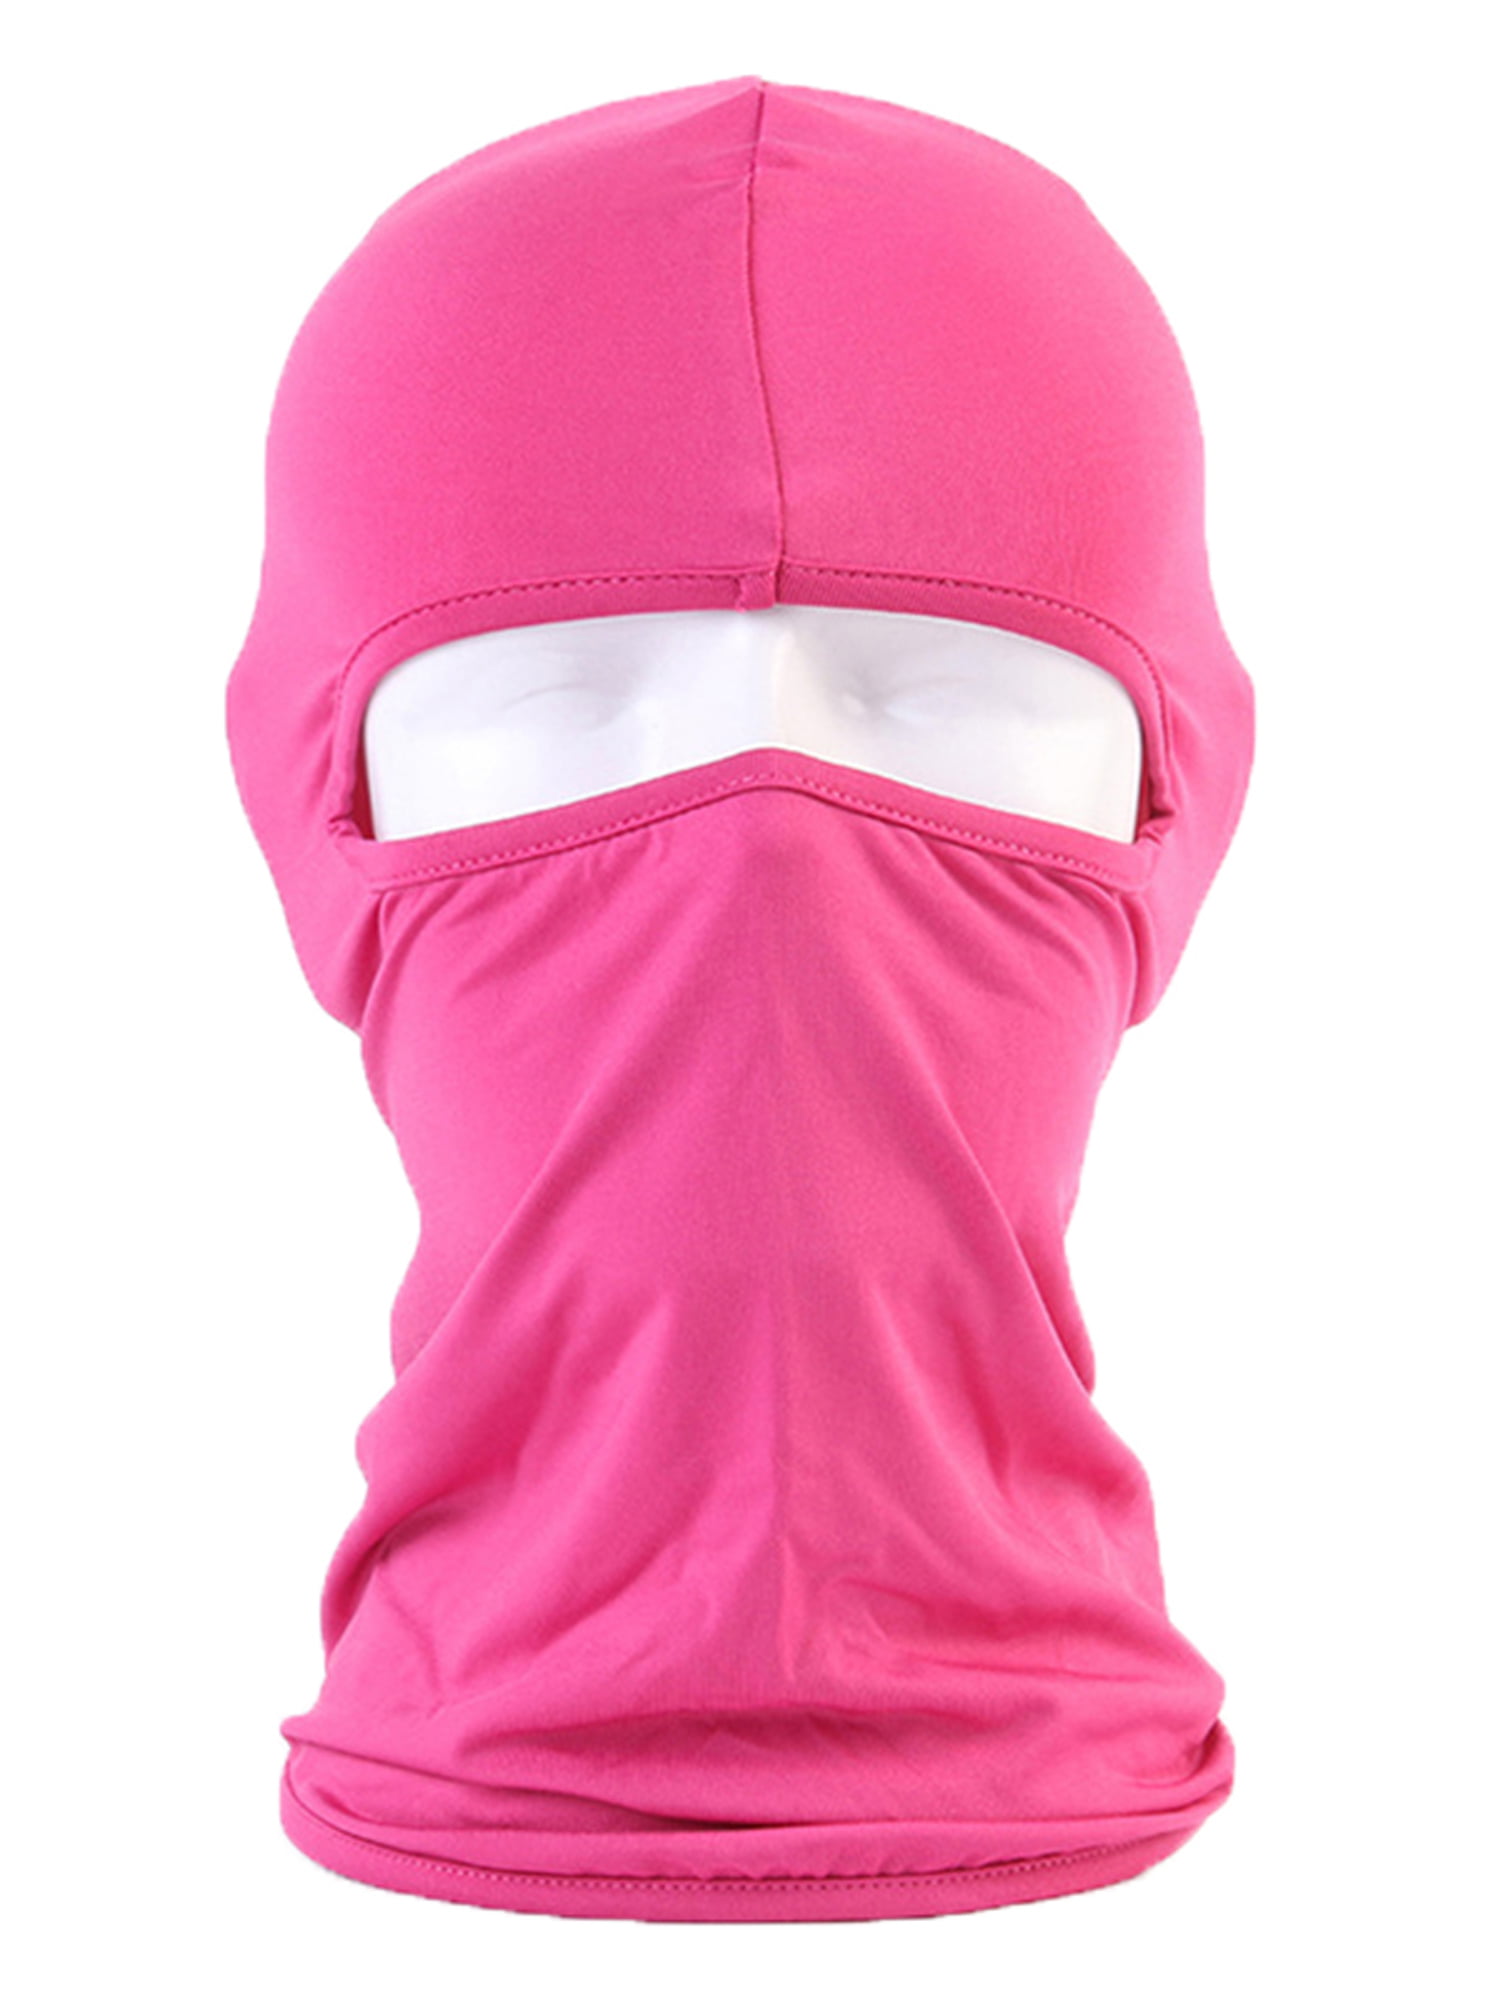 Outdoor Windproof Thermal Balaclava Full Face Cover Neck Sport Motorcycle Helmet 